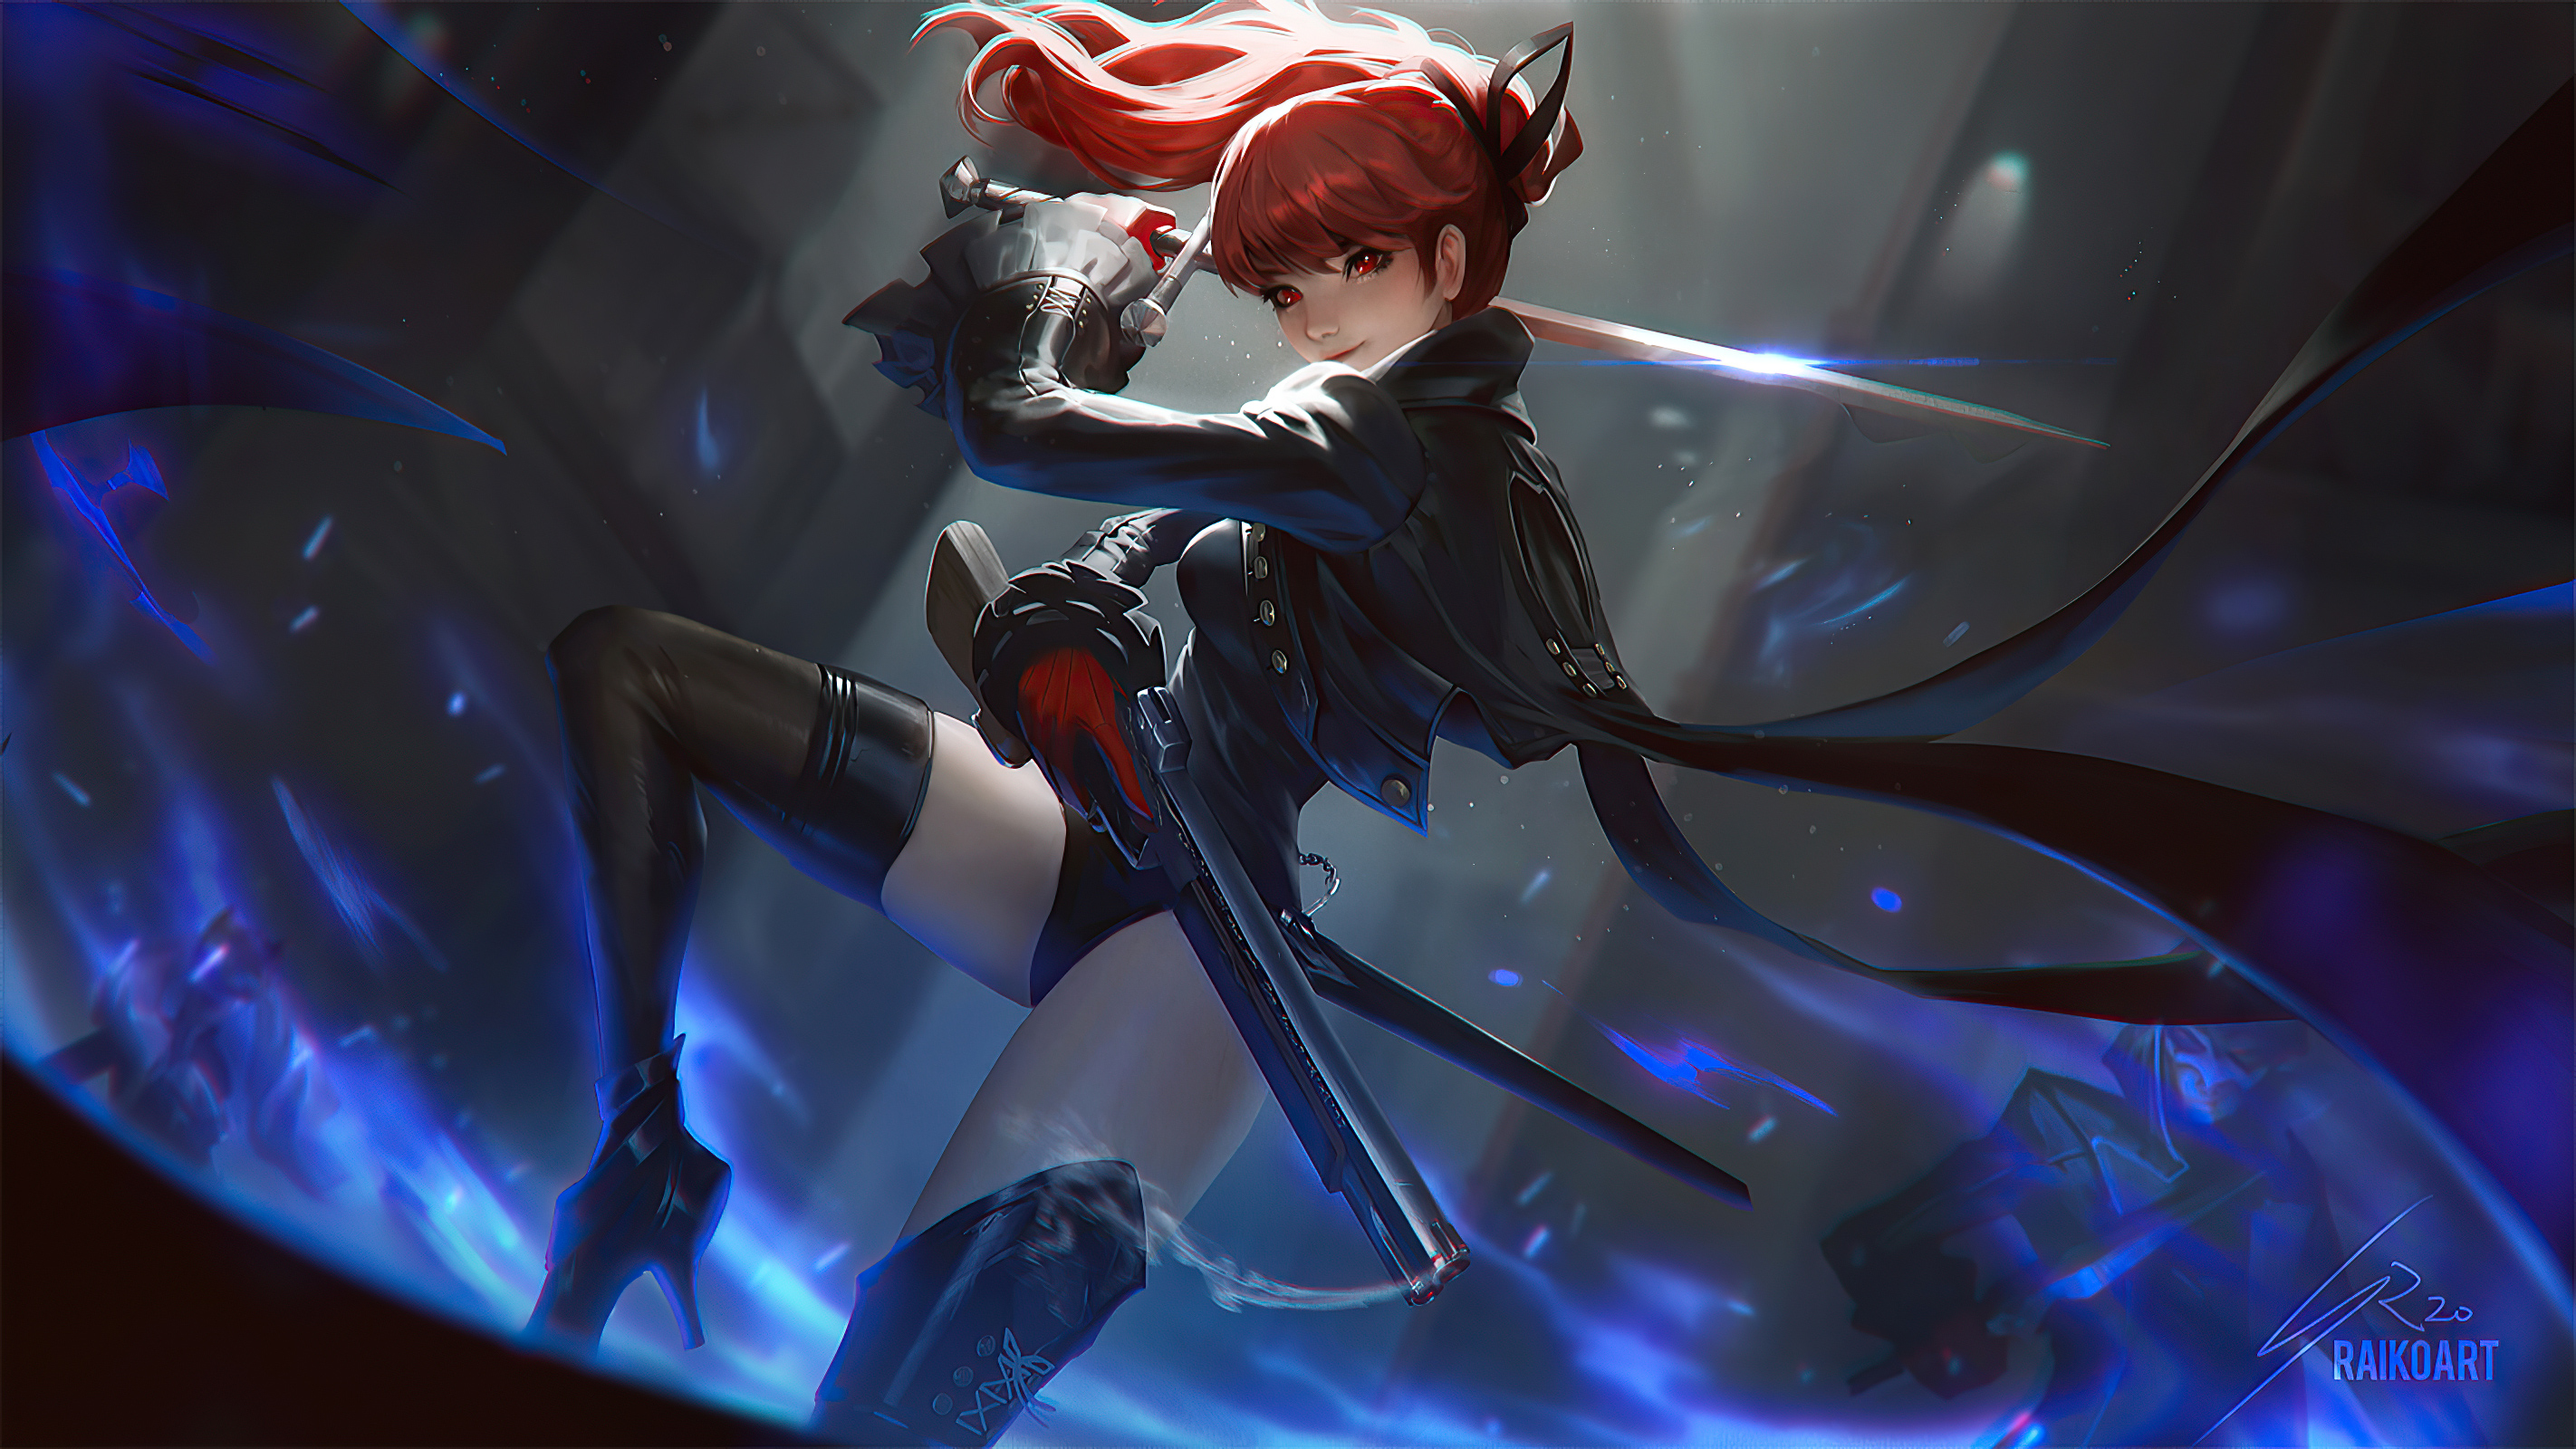 Red head sword girl hd artist k wallpapers images backgrounds photos and pictures